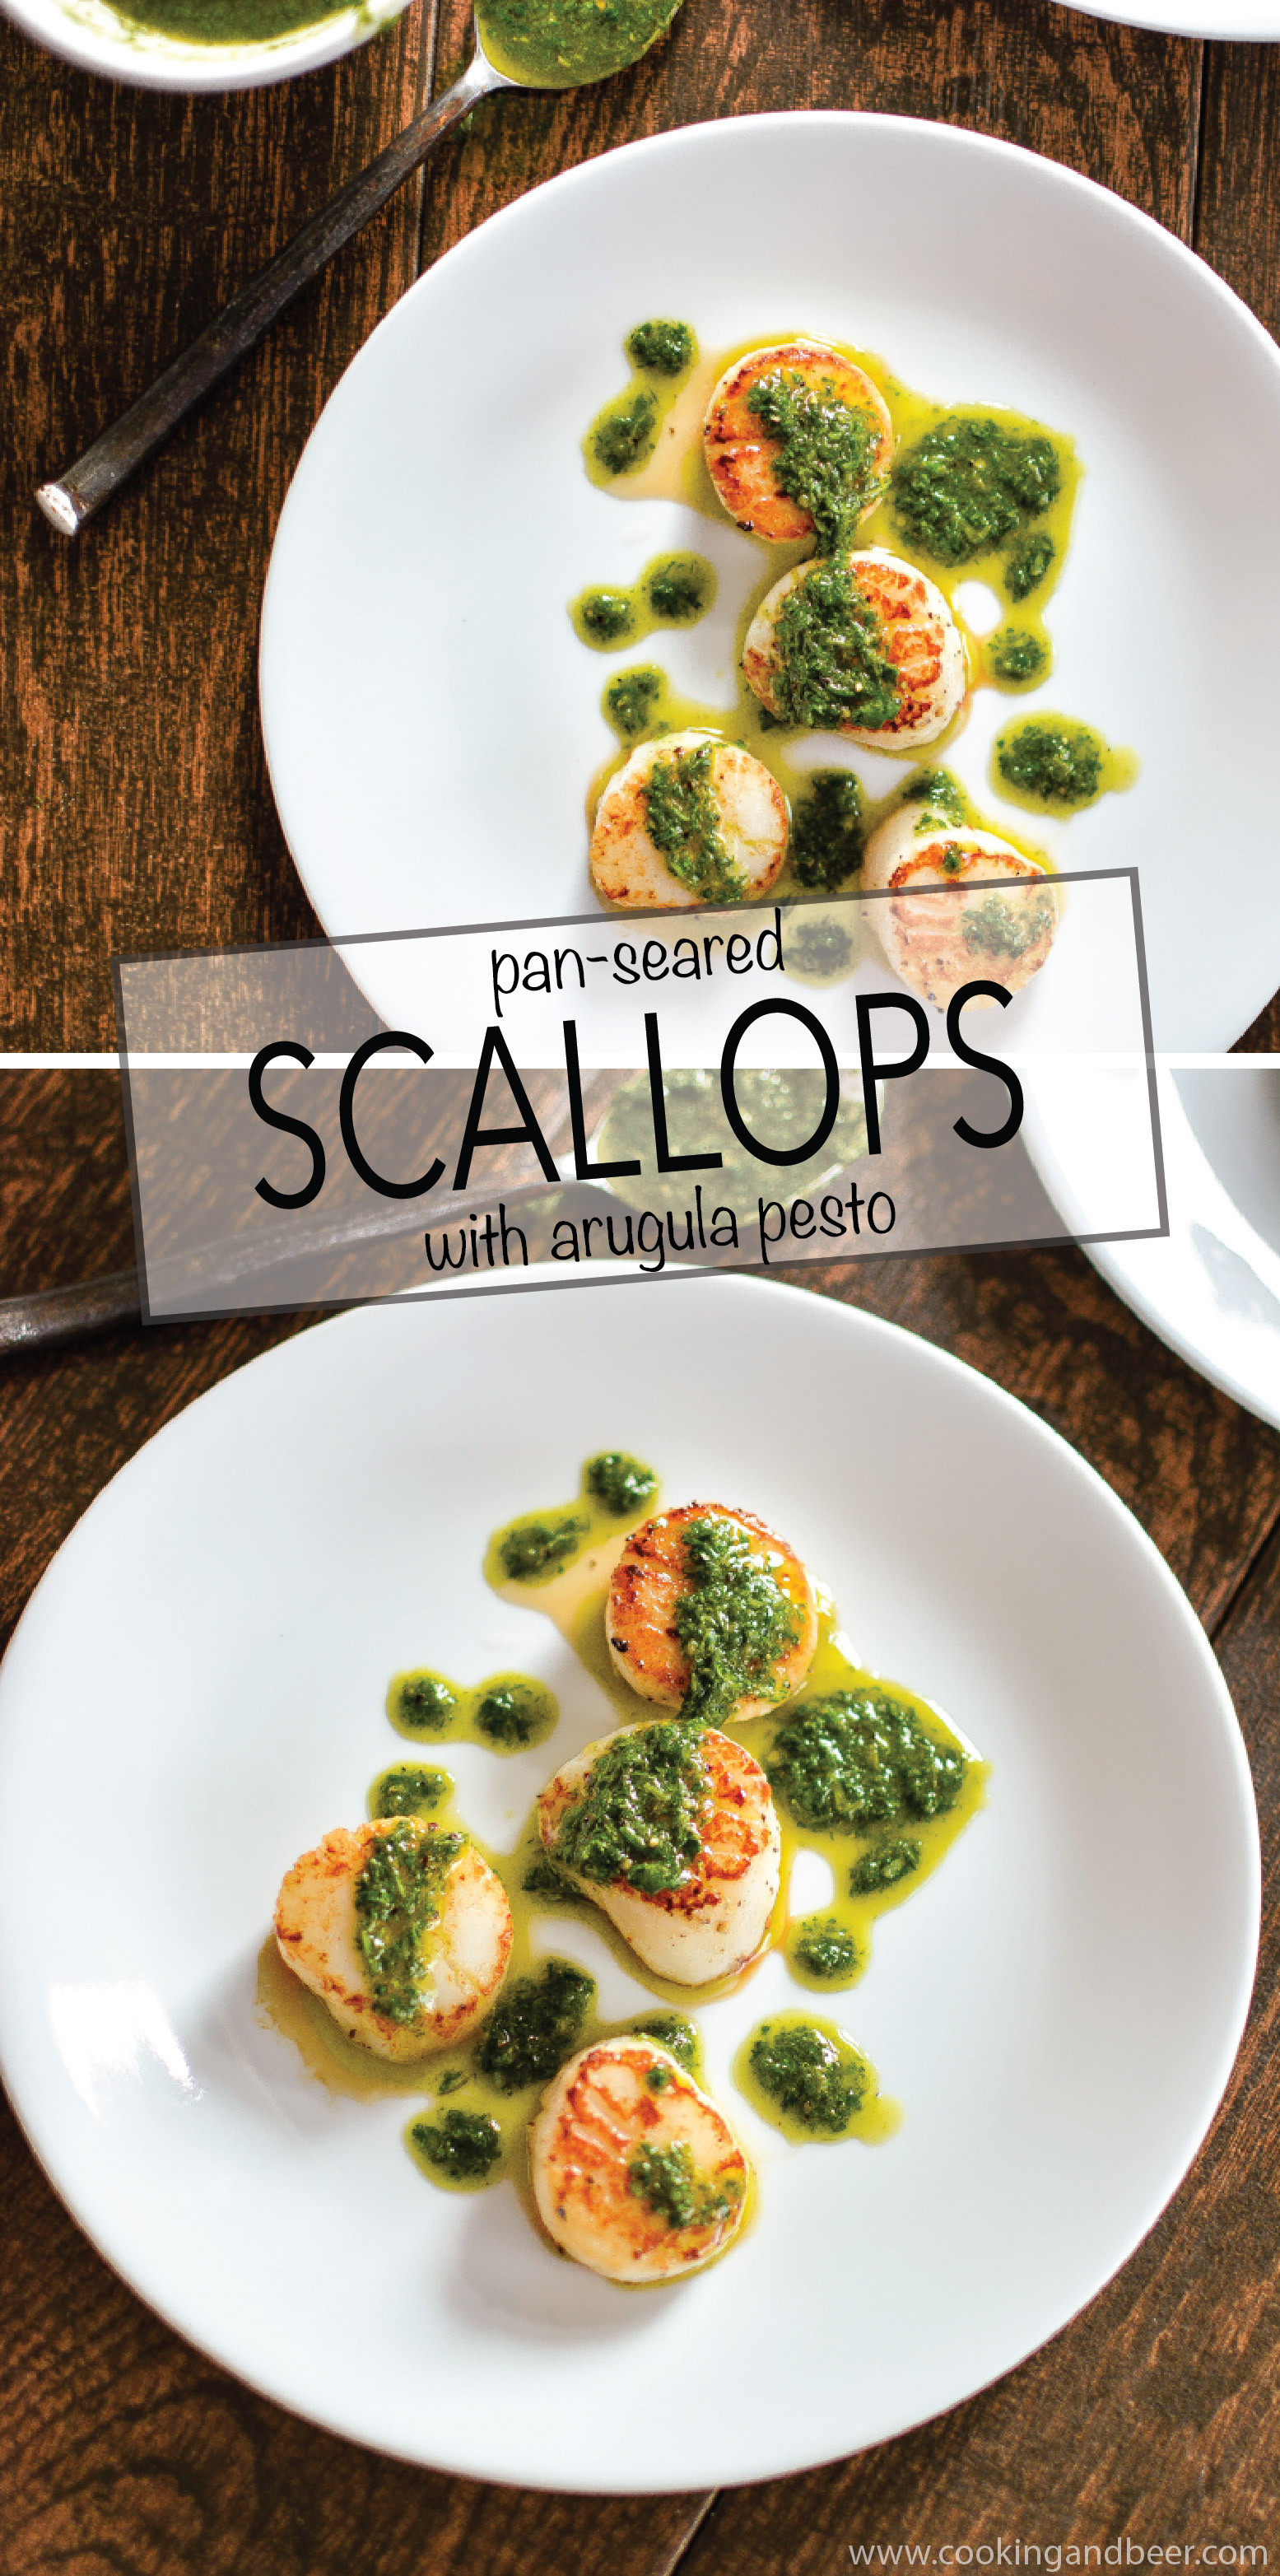 Pan-Seared Scallops with Arugula Pesto is a summer recipe to highlight fresh seafood with greens and fresh herbs! | www.cookingandbeer.com